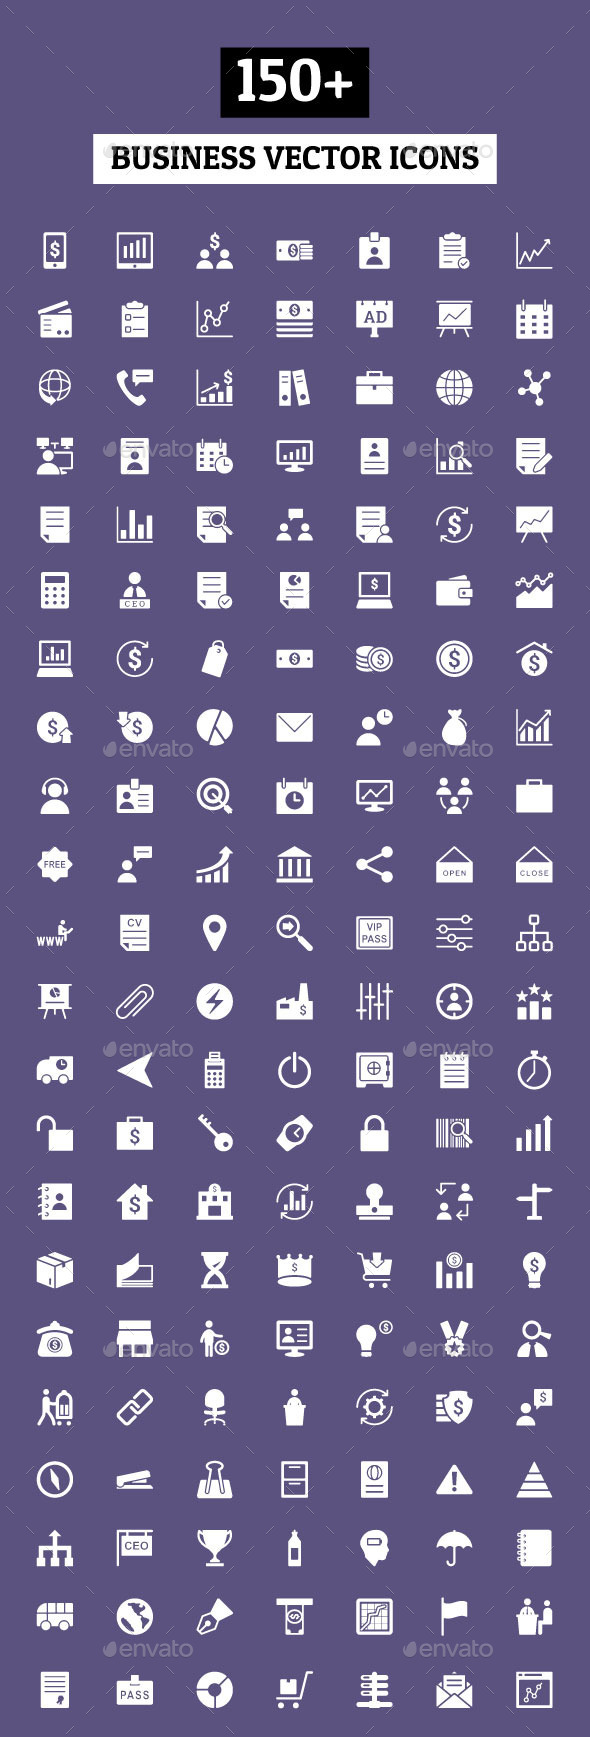 150+ Business Vector Icons